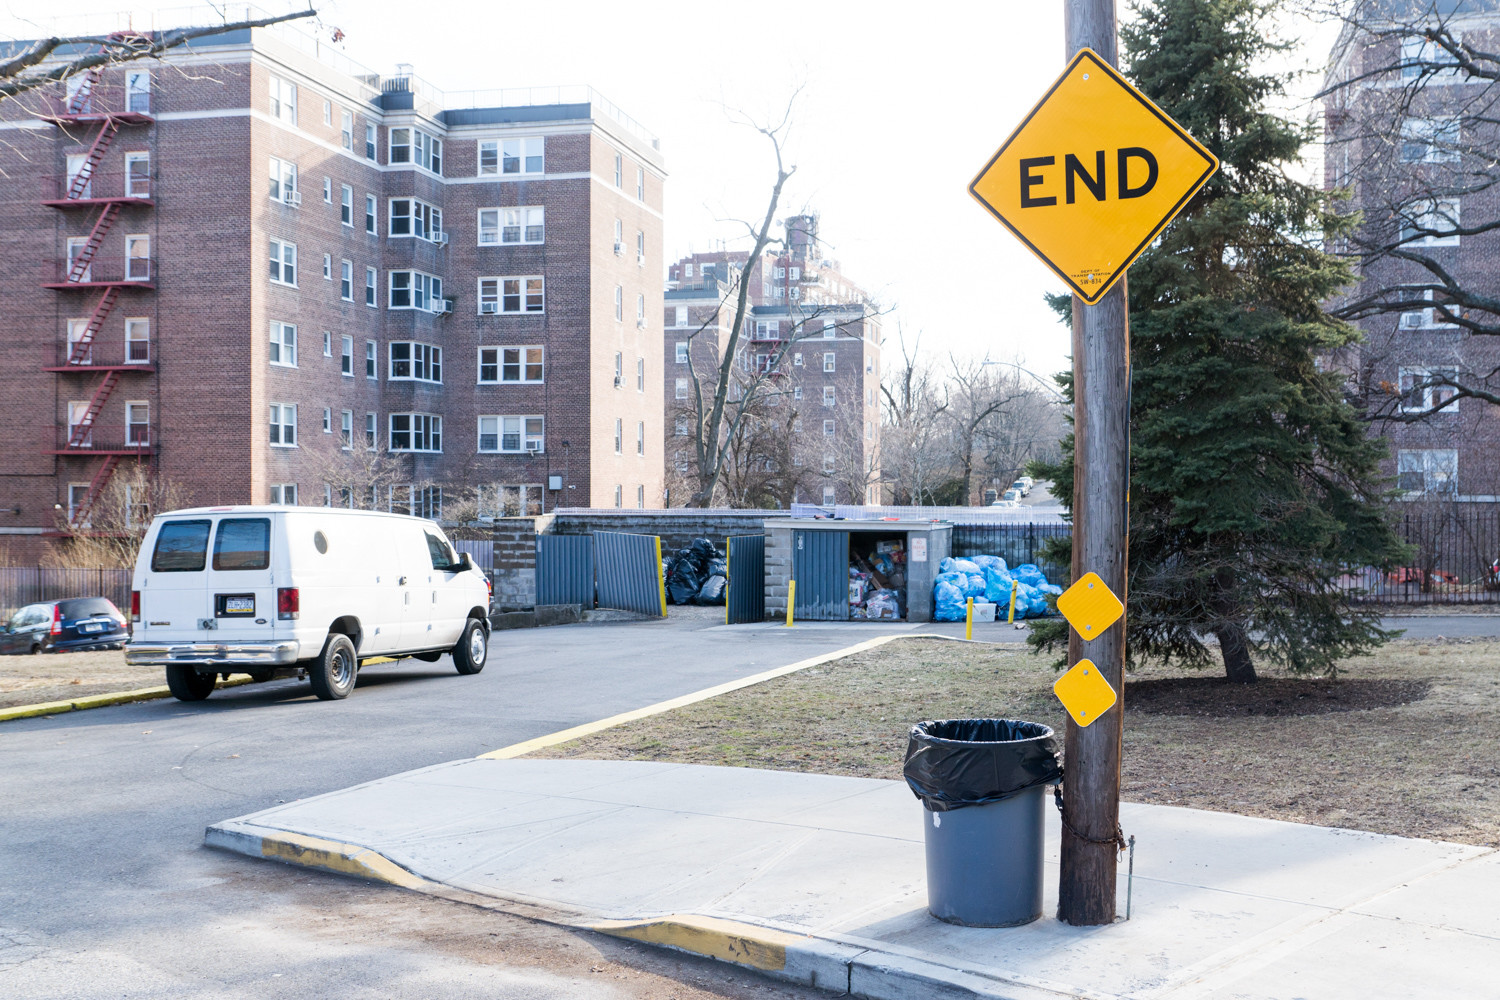 A sign warns pedestrians and motorists of a dead end on Netherland Avenue between West 256th and West 254th streets, where a row of dumpsters and a cinderblock wall blocks access. The North Riverdale Merchants and Business Association is one of the groups pushing to extend sidewalks, creating a connector path that could make it easier for pedestrians.